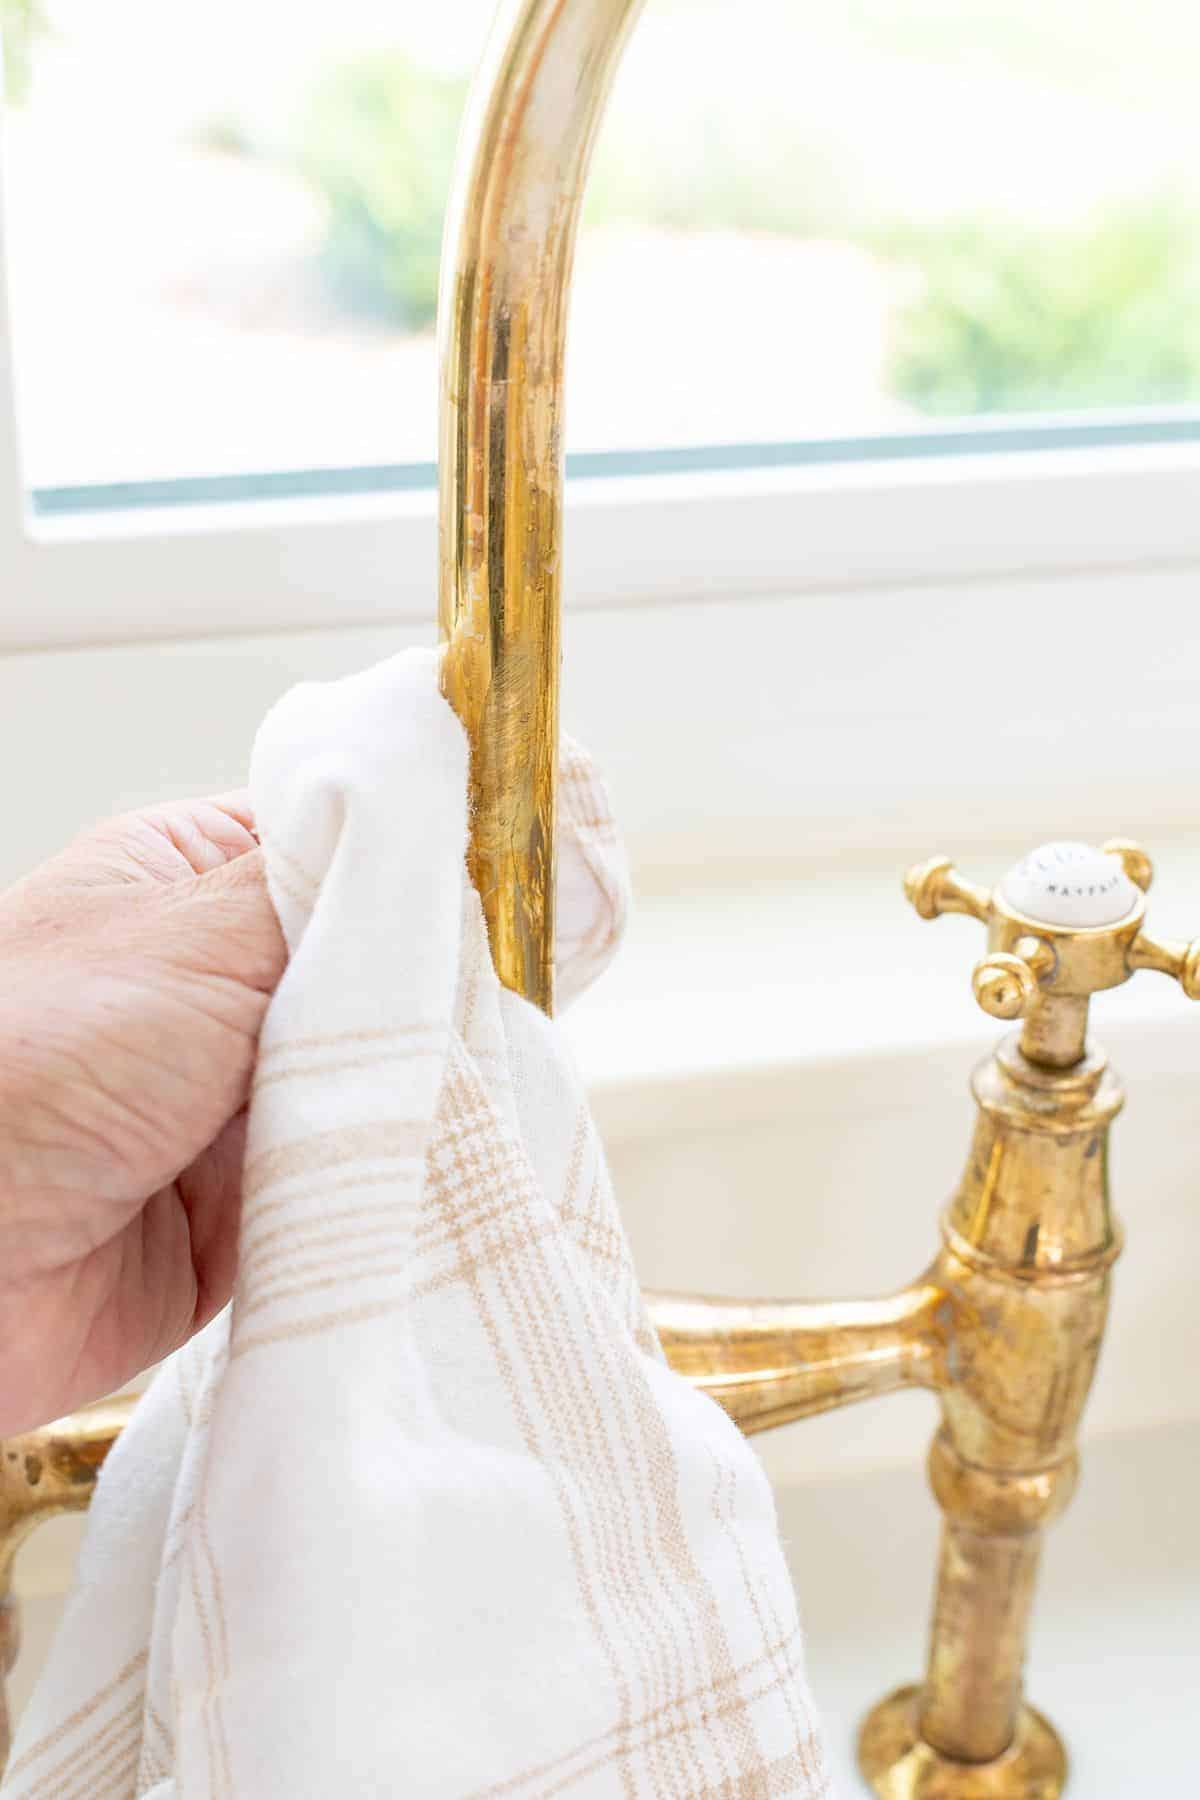 A tarnished brass faucet being scrubbed with a soft cloth.